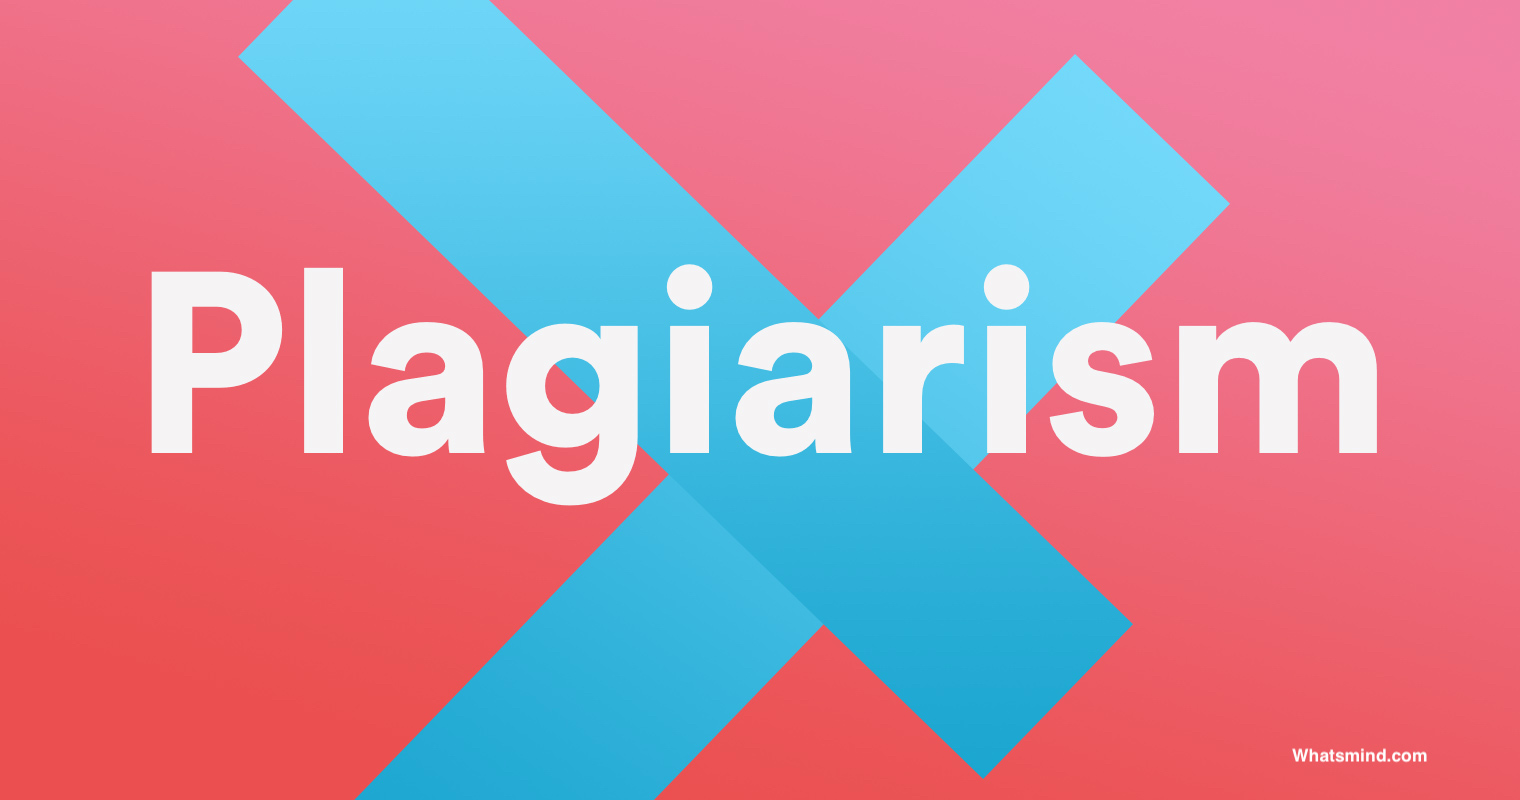 3 Ways plagiarism can quickly ruin your reputation - But here is a solution